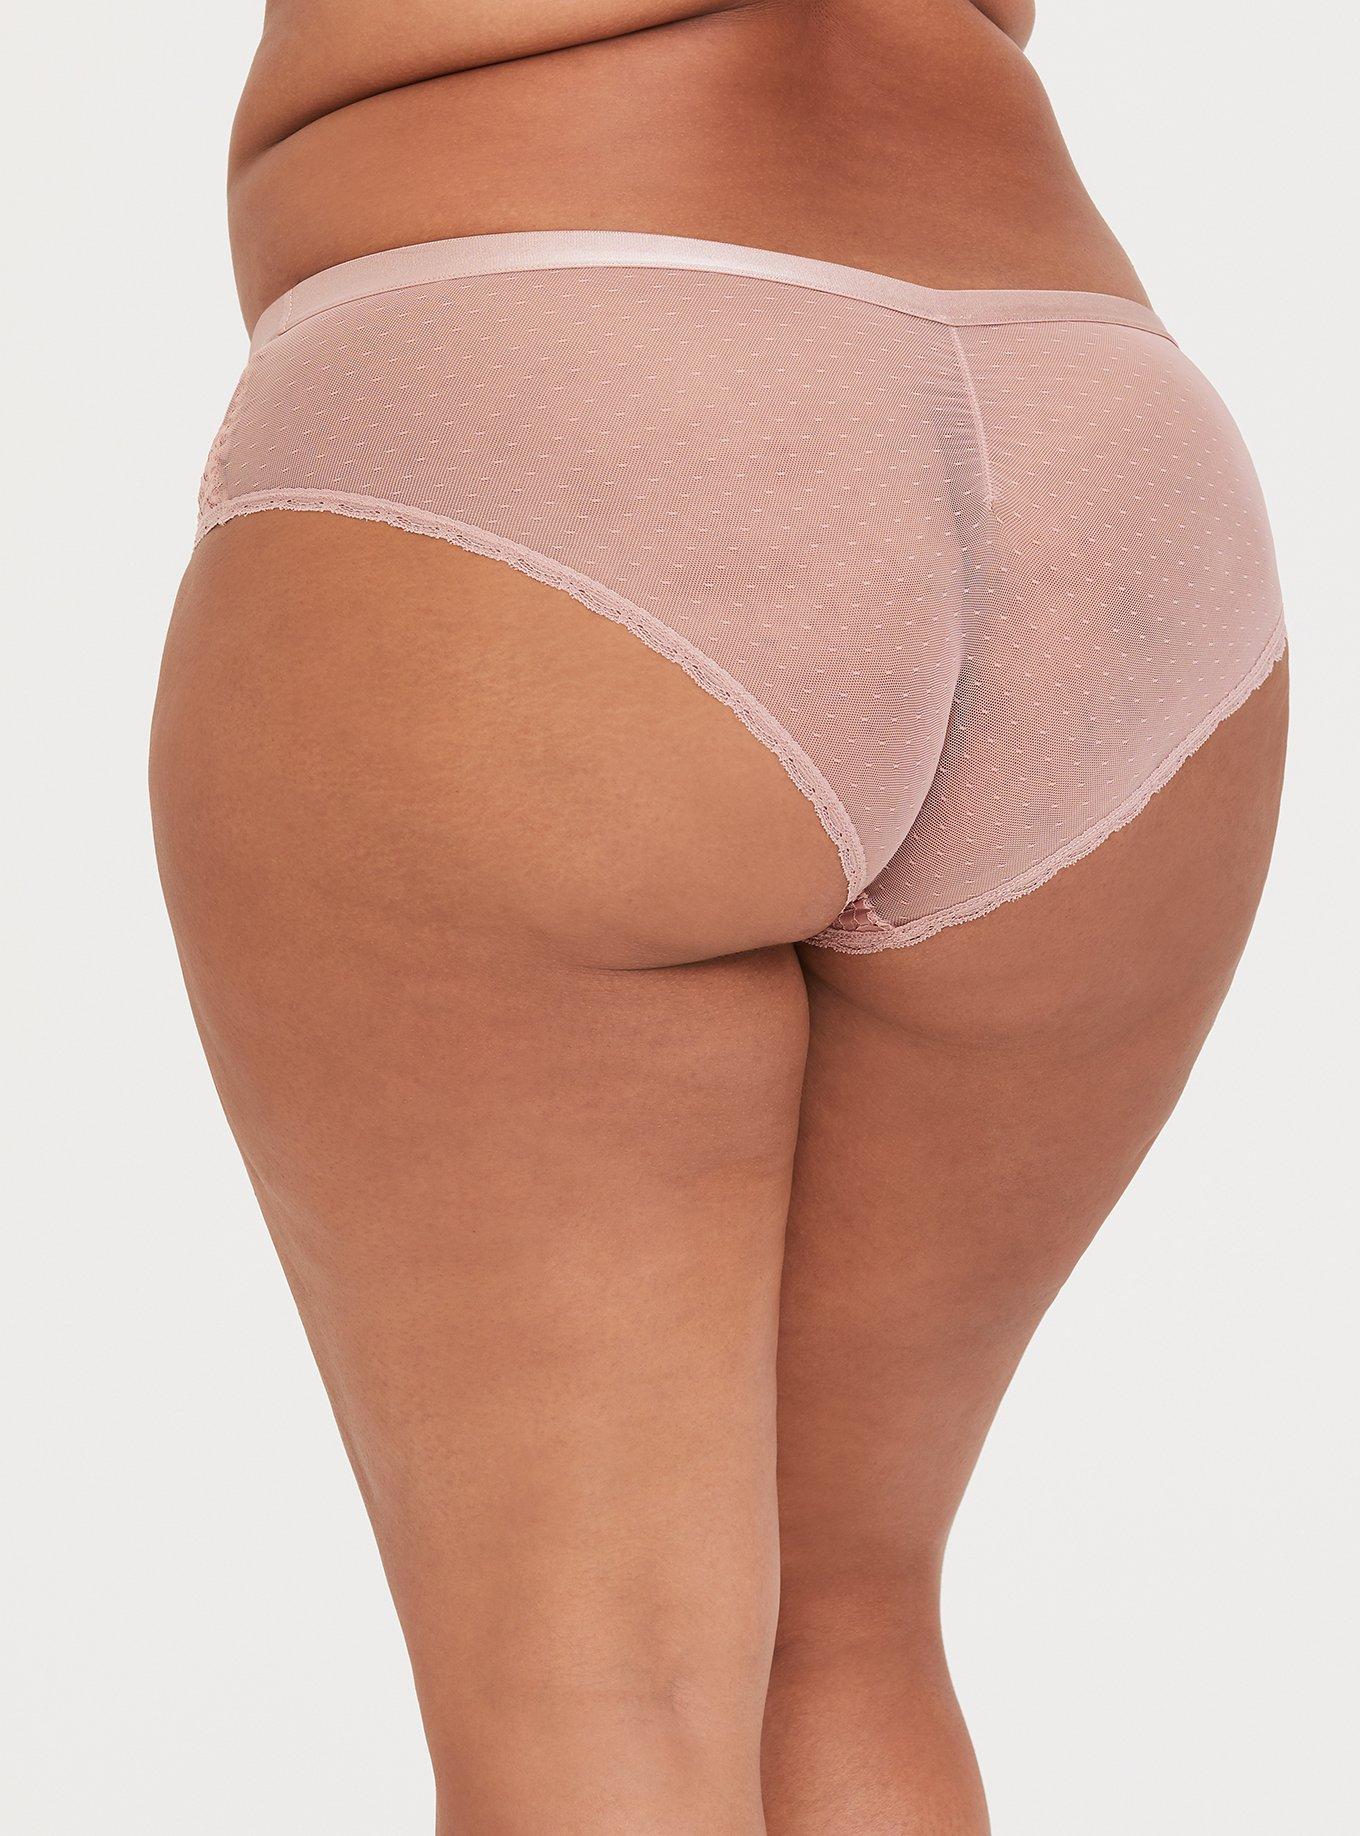 Plus Size - Microfiber And Mesh Mid-Rise Hipster Panty - Torrid